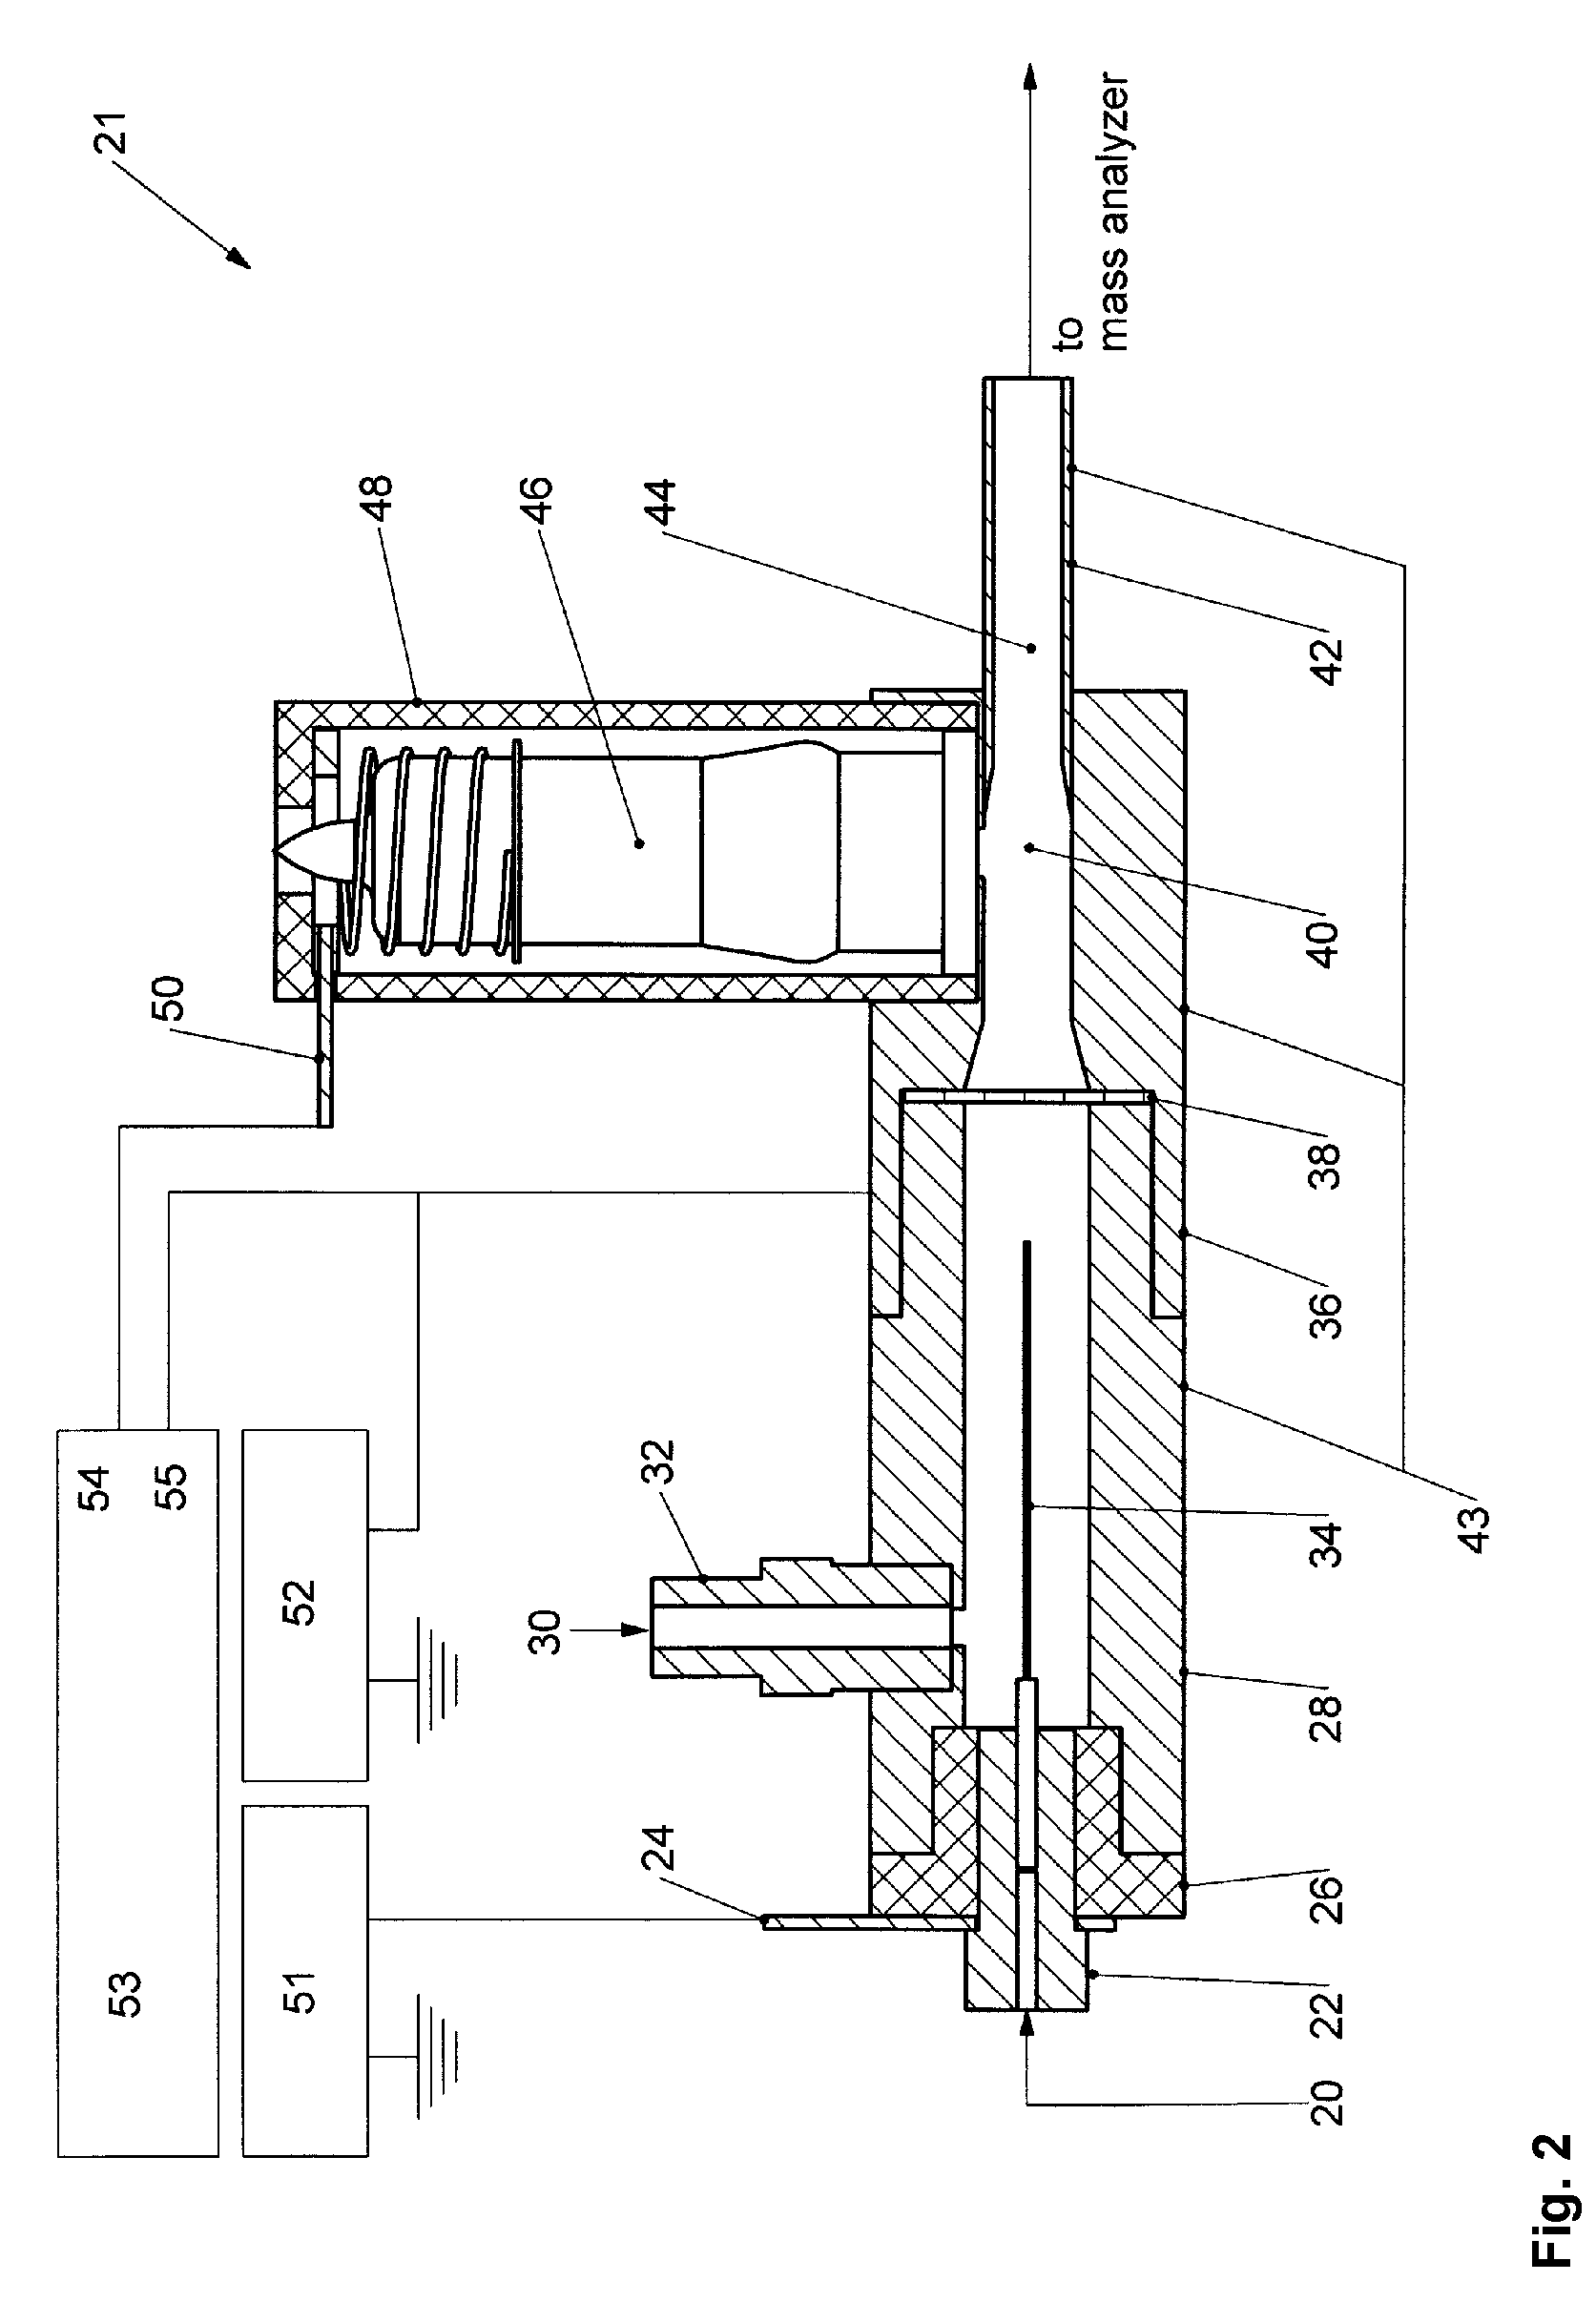 AP-ECD methods and apparatus for mass spectrometric analysis of peptides and proteins